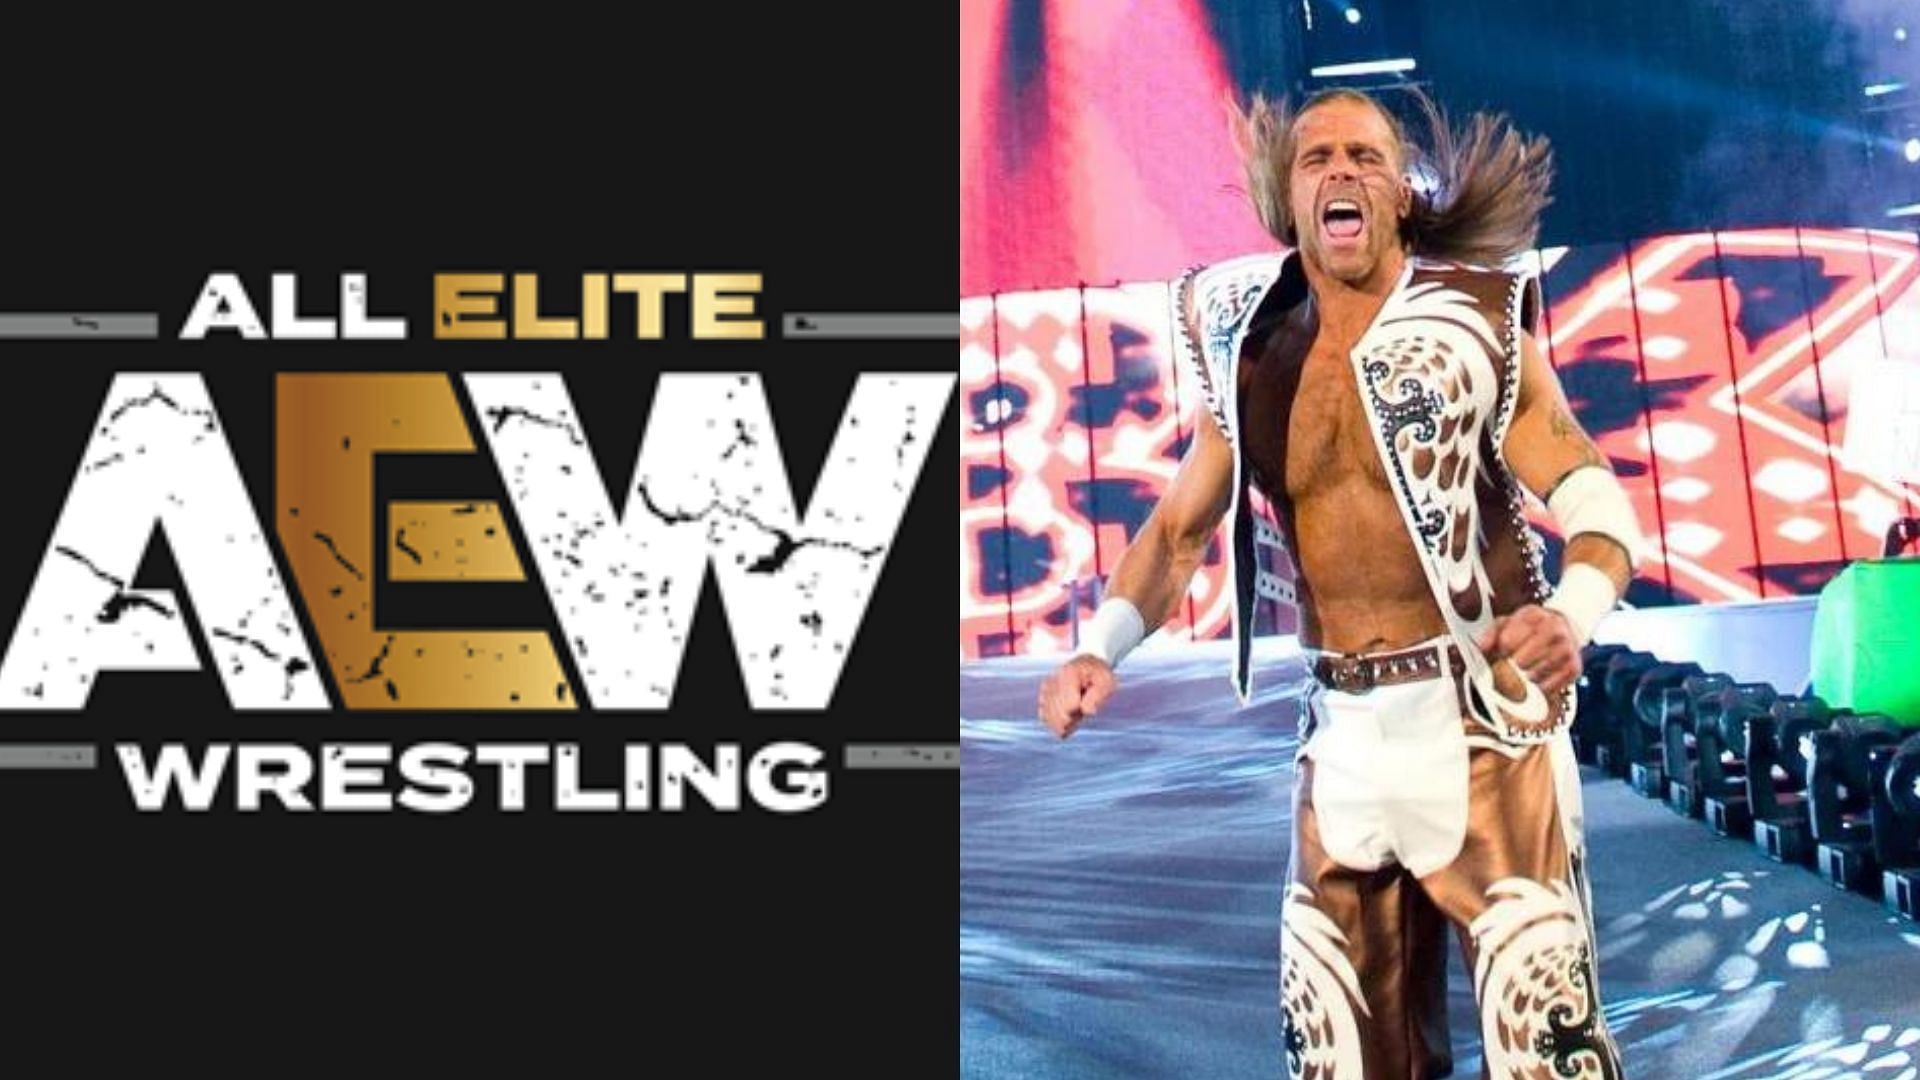 Shawn Michaels is one of the greatest professional wrestlers of all time